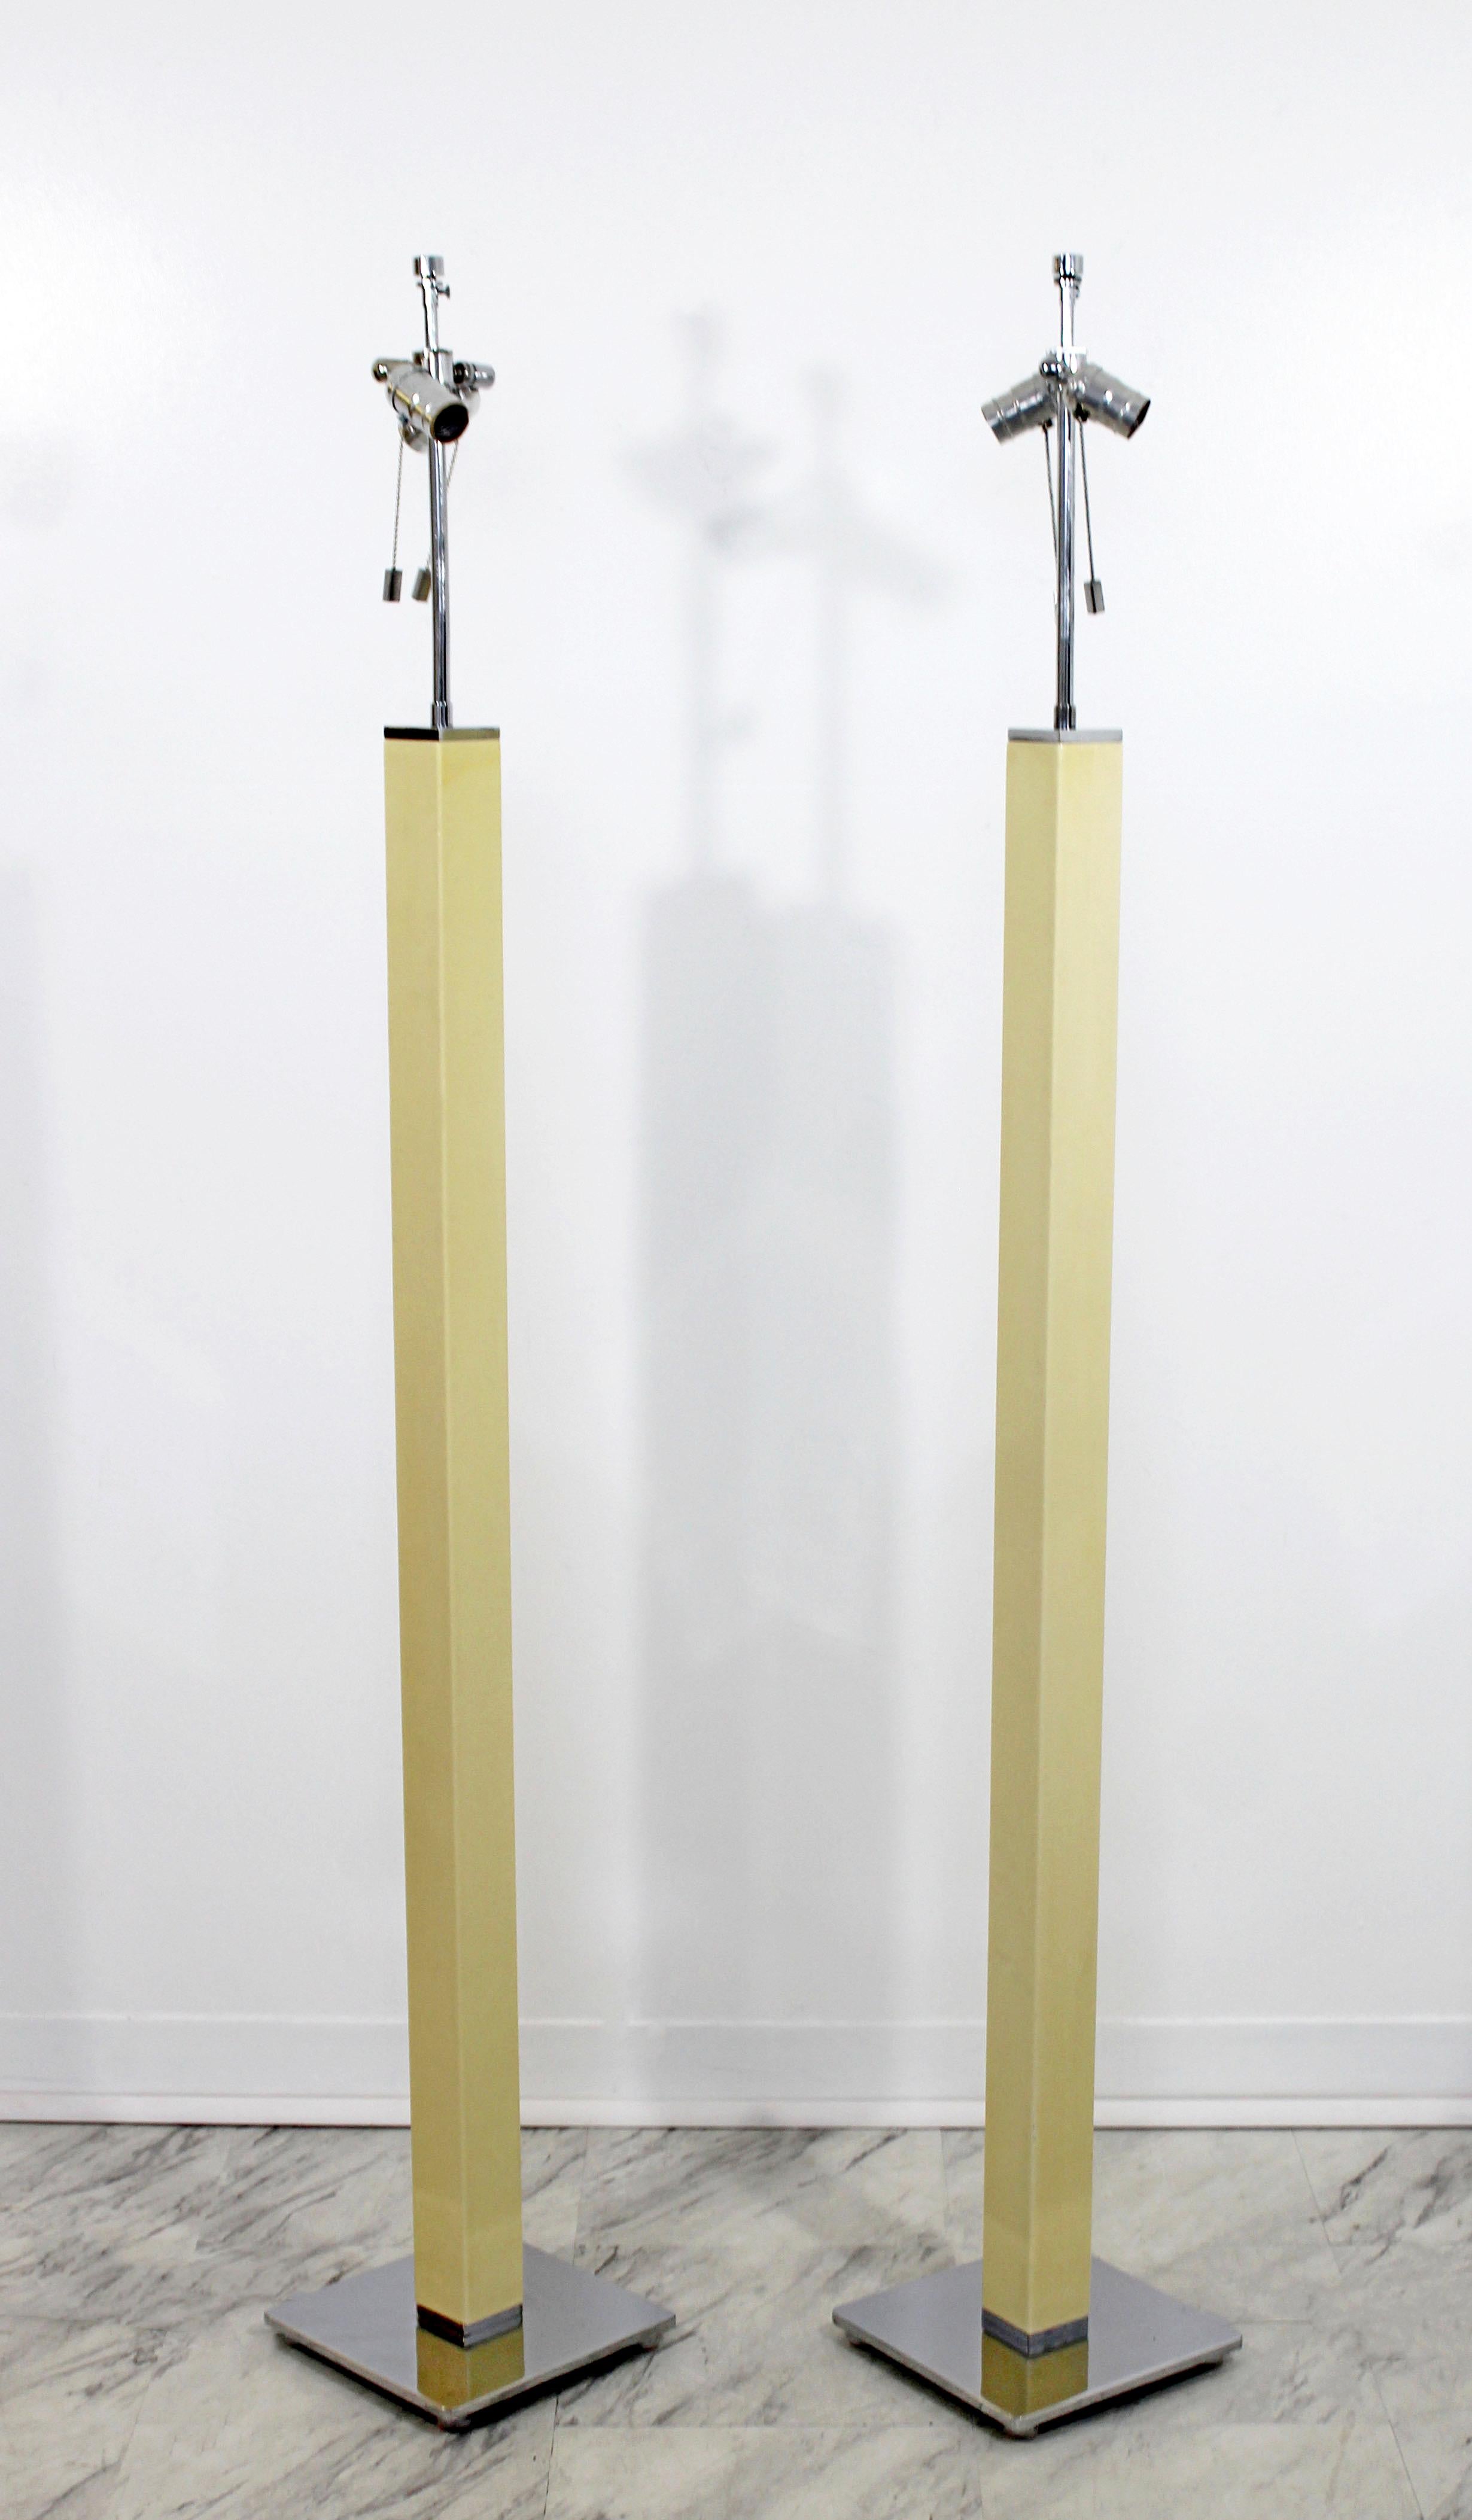 For your consideration is a magnificent pair of column floor lamps, made of chrome and wrapped in yellow lizard, by Karl Springer, circa 1970s. In excellent condition. The dimensions are 9